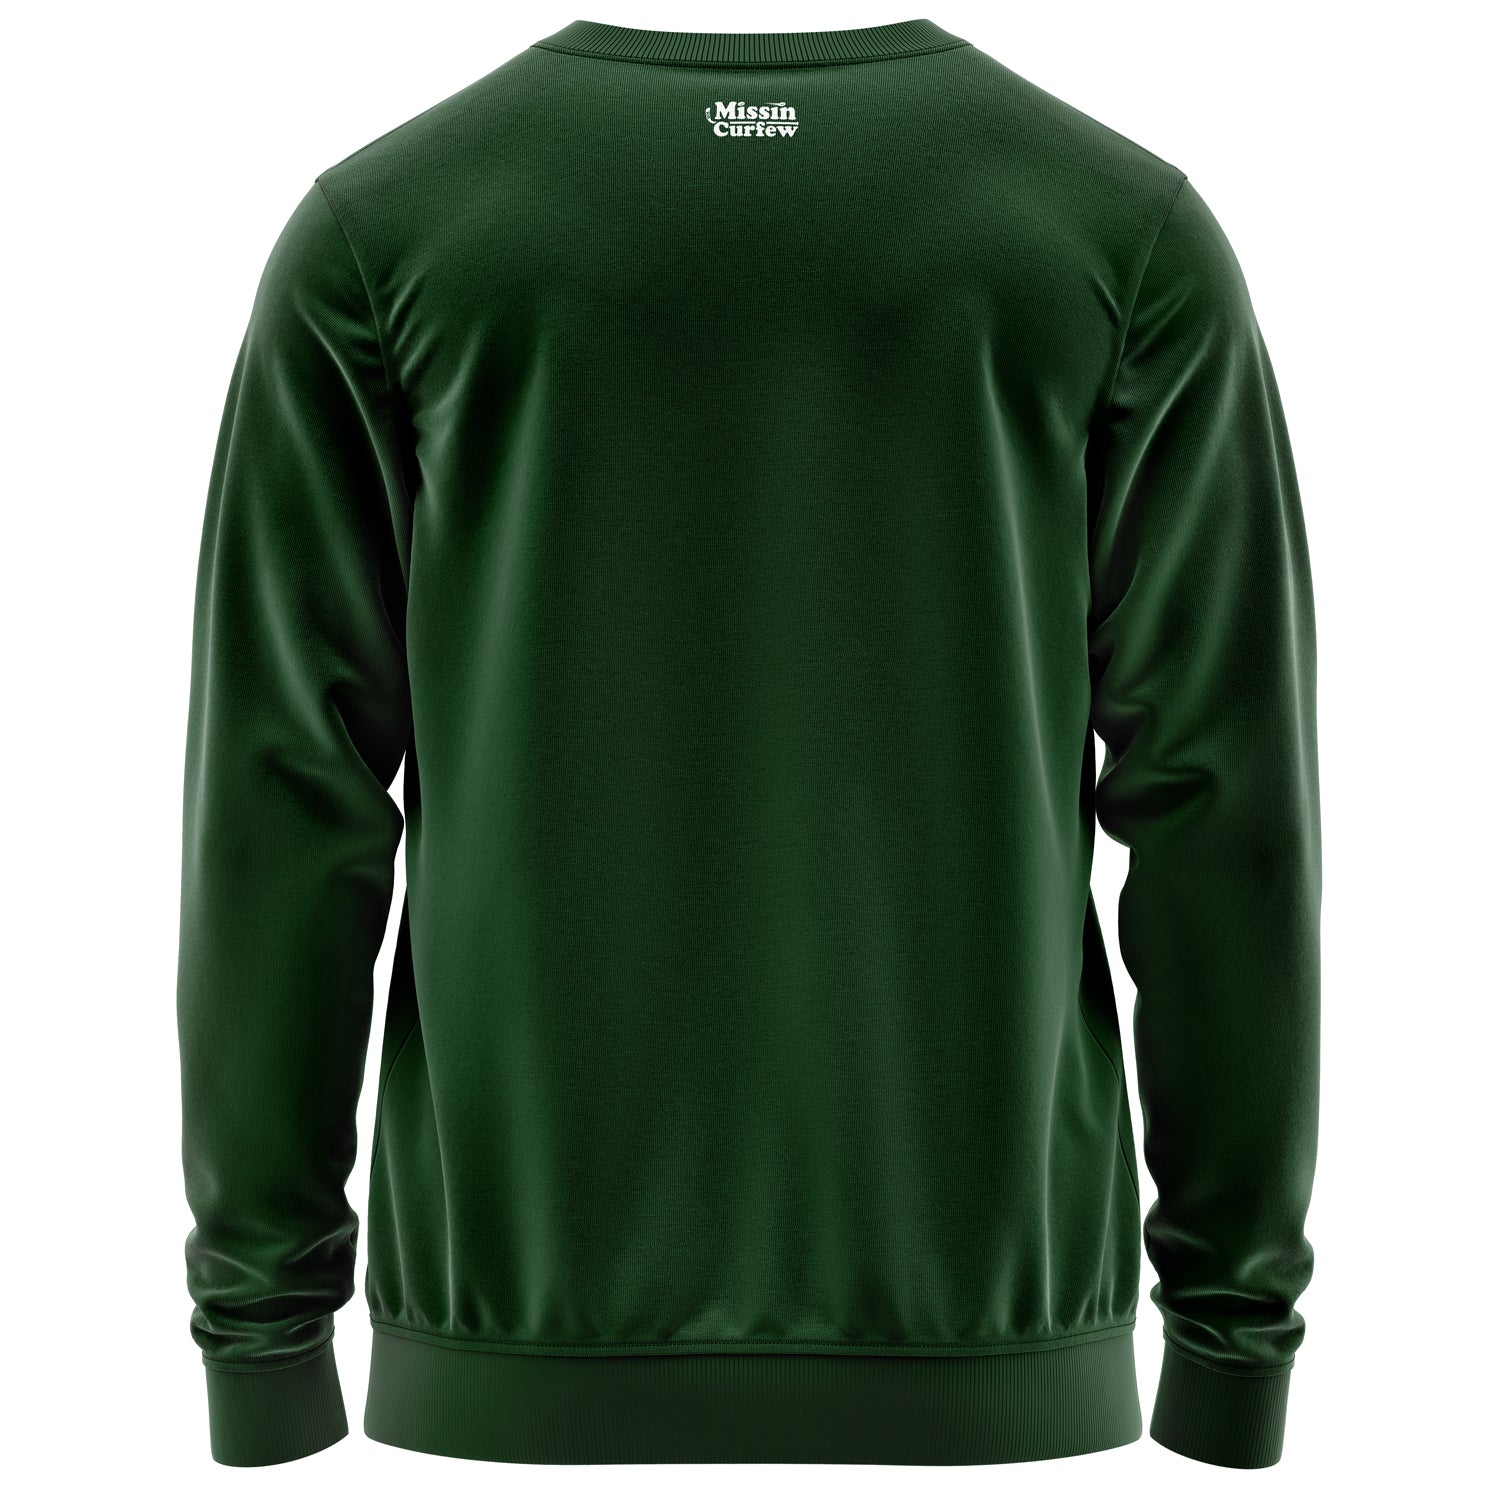 BEER GOGGLES UGLY SWEATER CREWNECK - GREEN